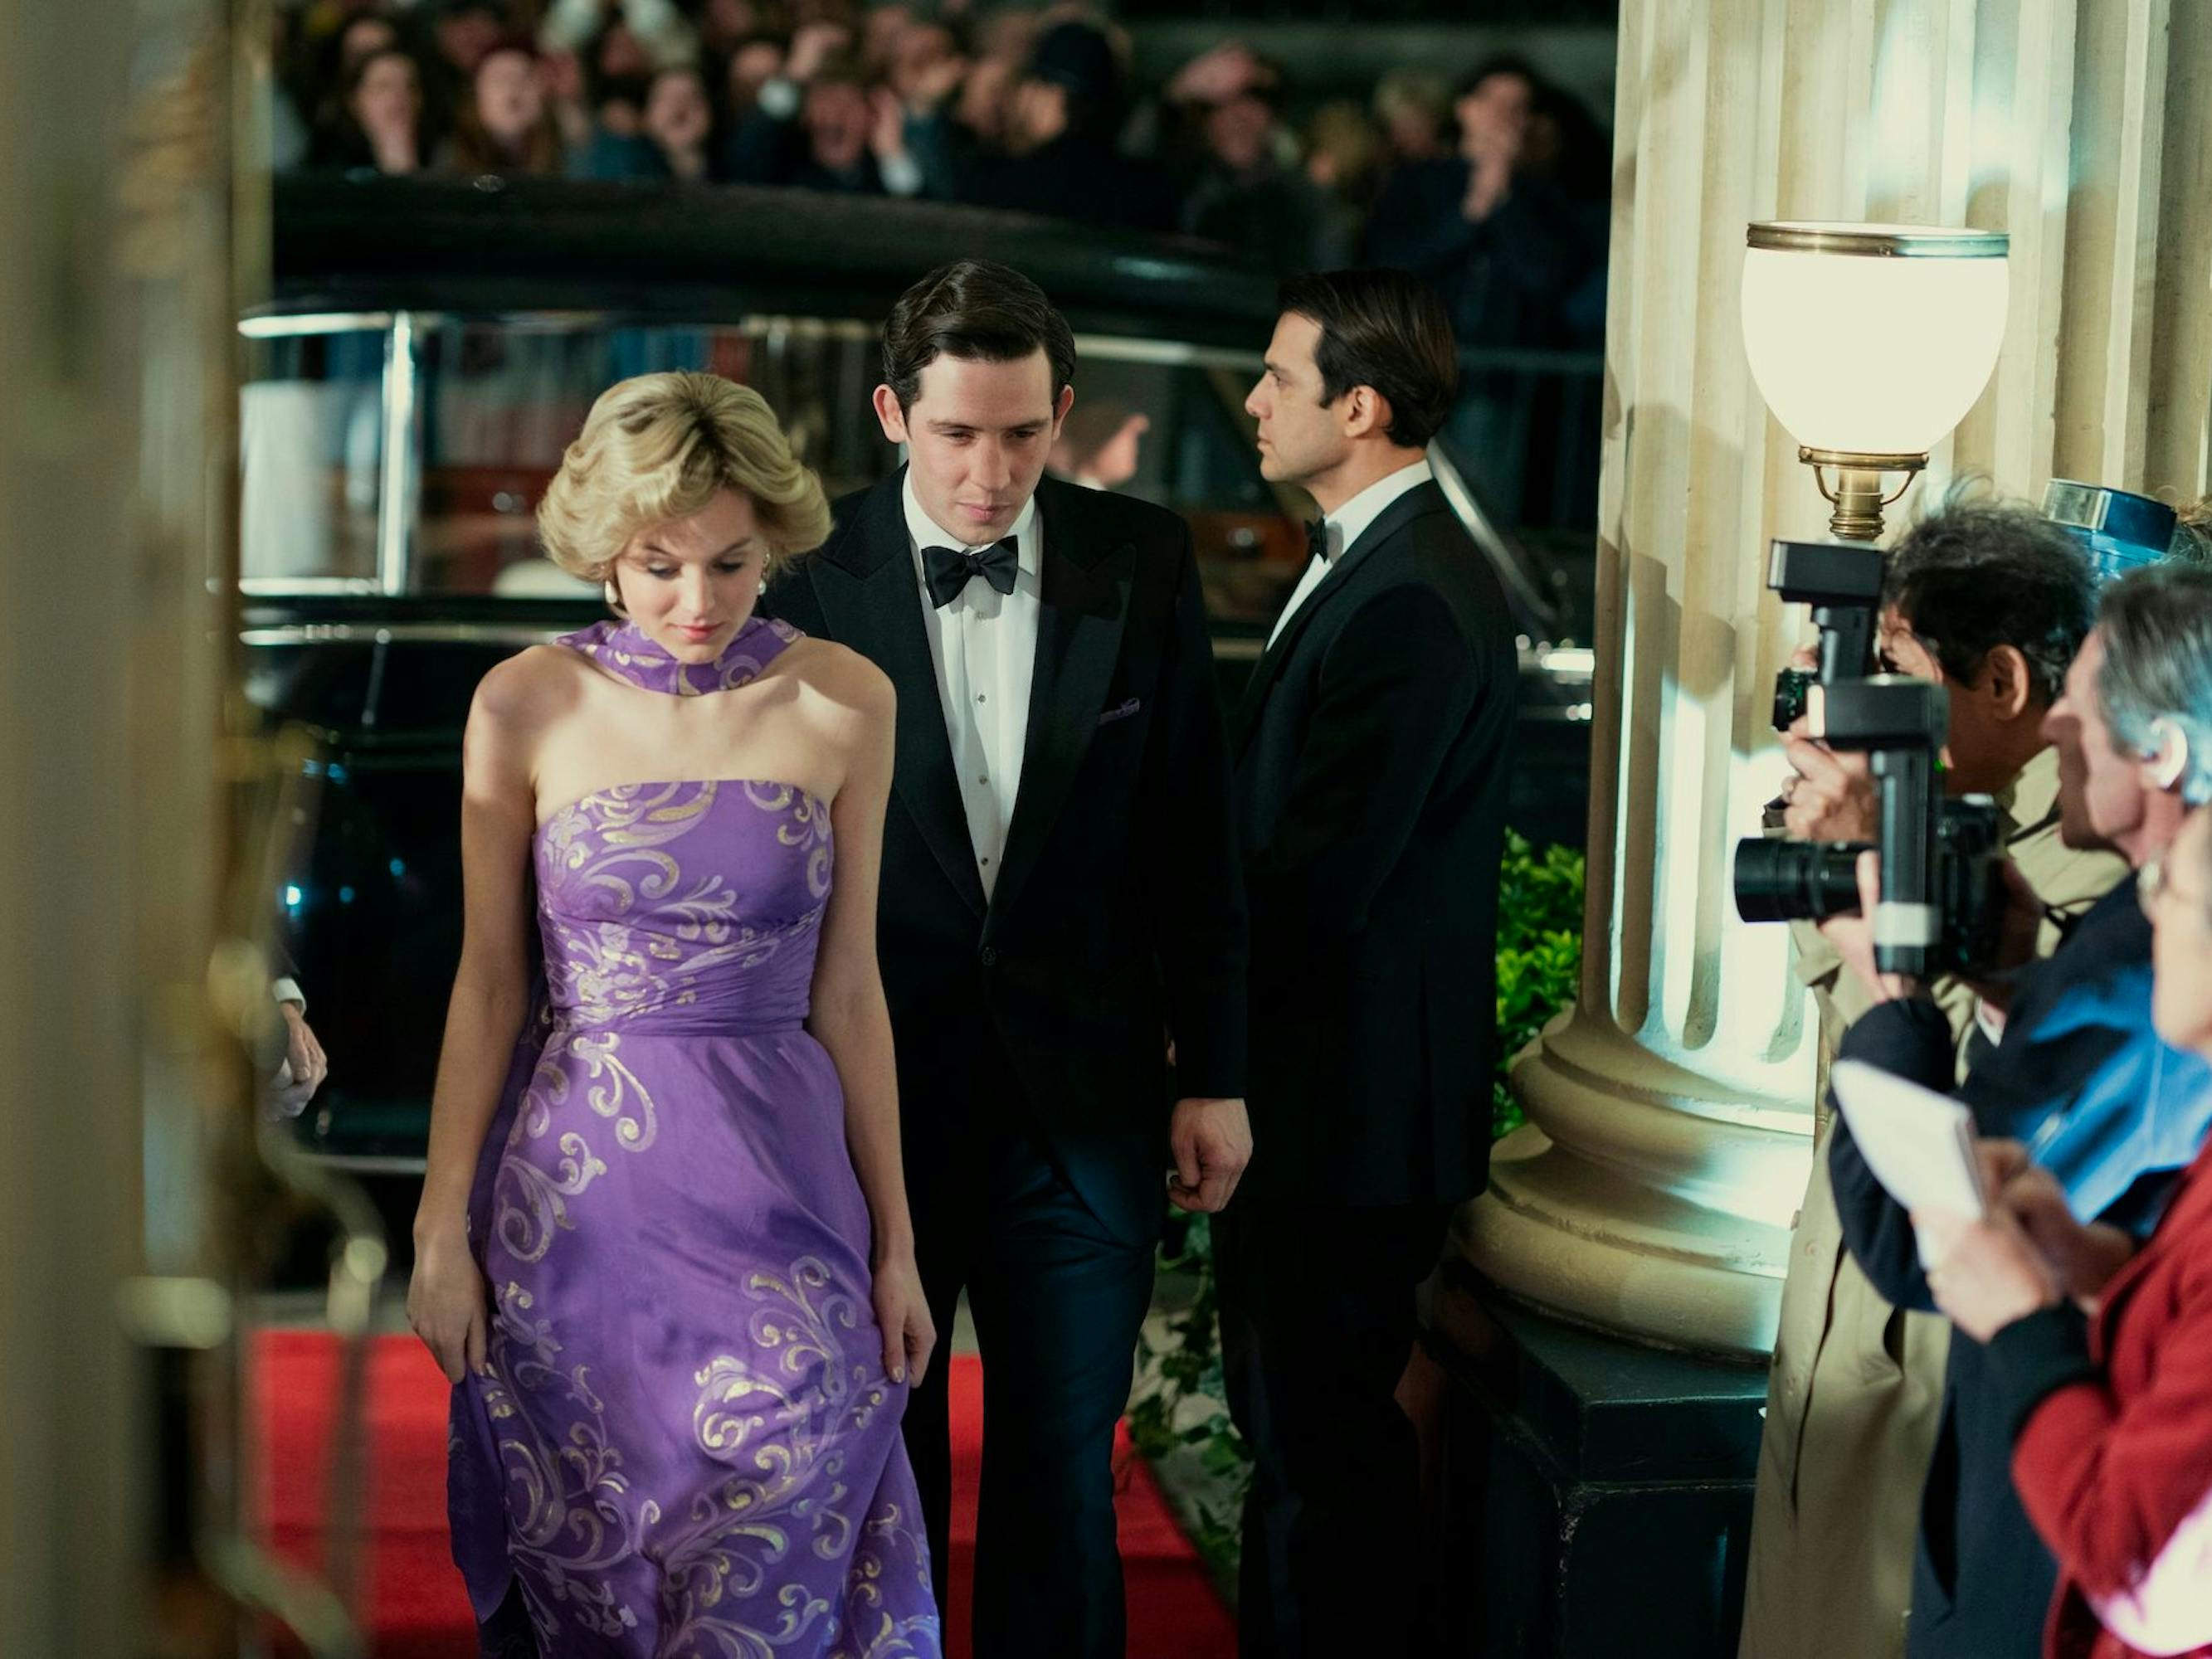 Diana Spencer (Emma Corrin) and Prince Charles (Josh O’Connor) enter through wide white doors. Corrin wears a beautiful purple dress, and Charles wears a tux. Outside are hundreds of fans and reporters, and inside are more cameras poised to snap a picture.